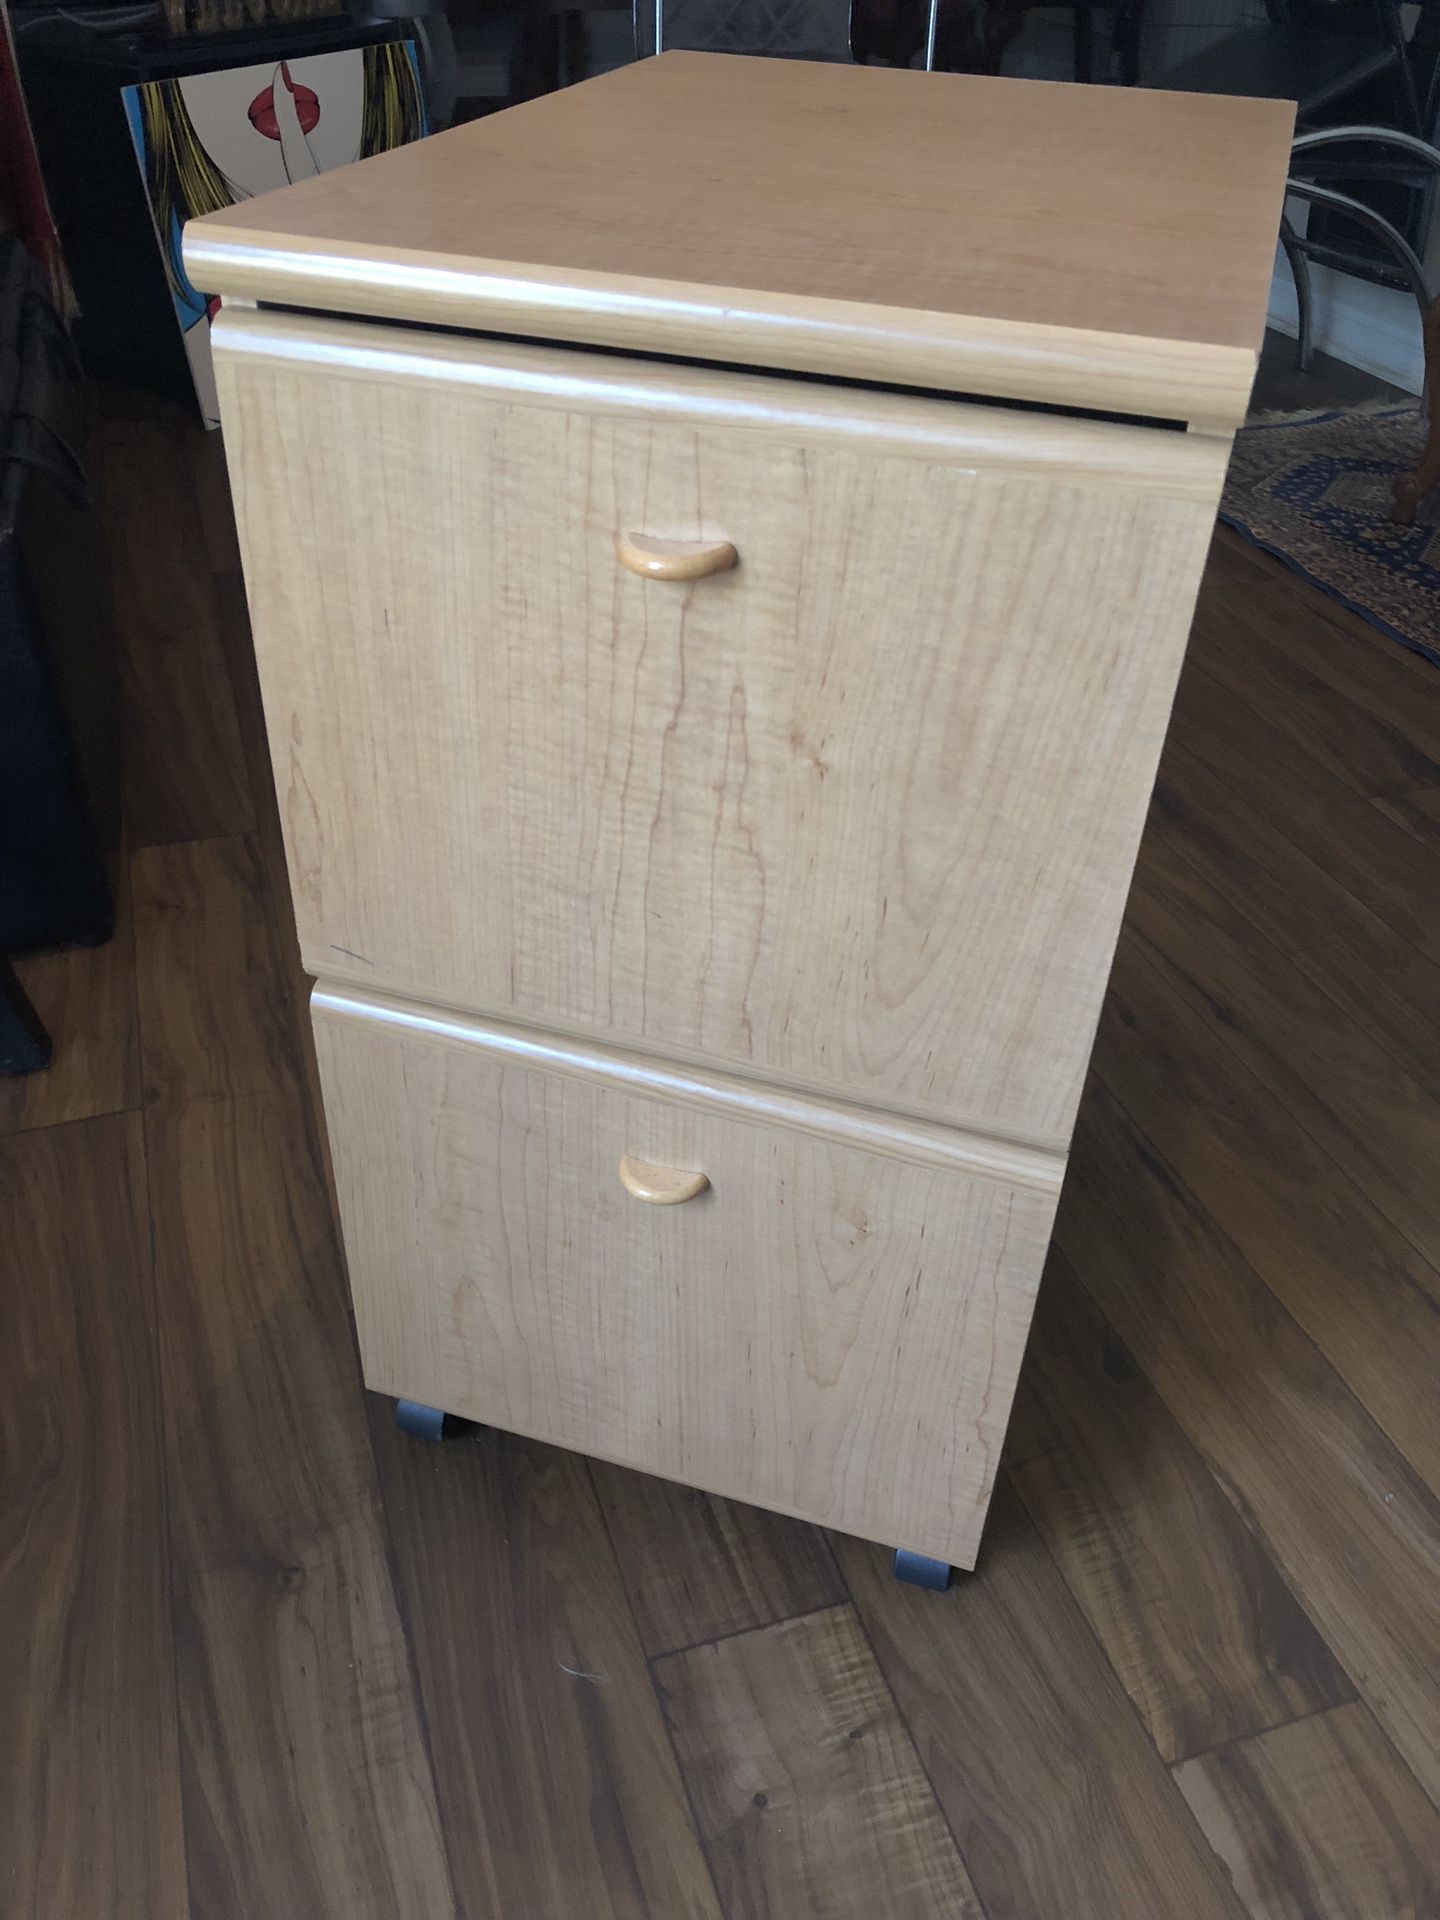 Good size File Cabinet with Wheels - 22.5” w x 15.5” d x 29” tall - Very good condition.